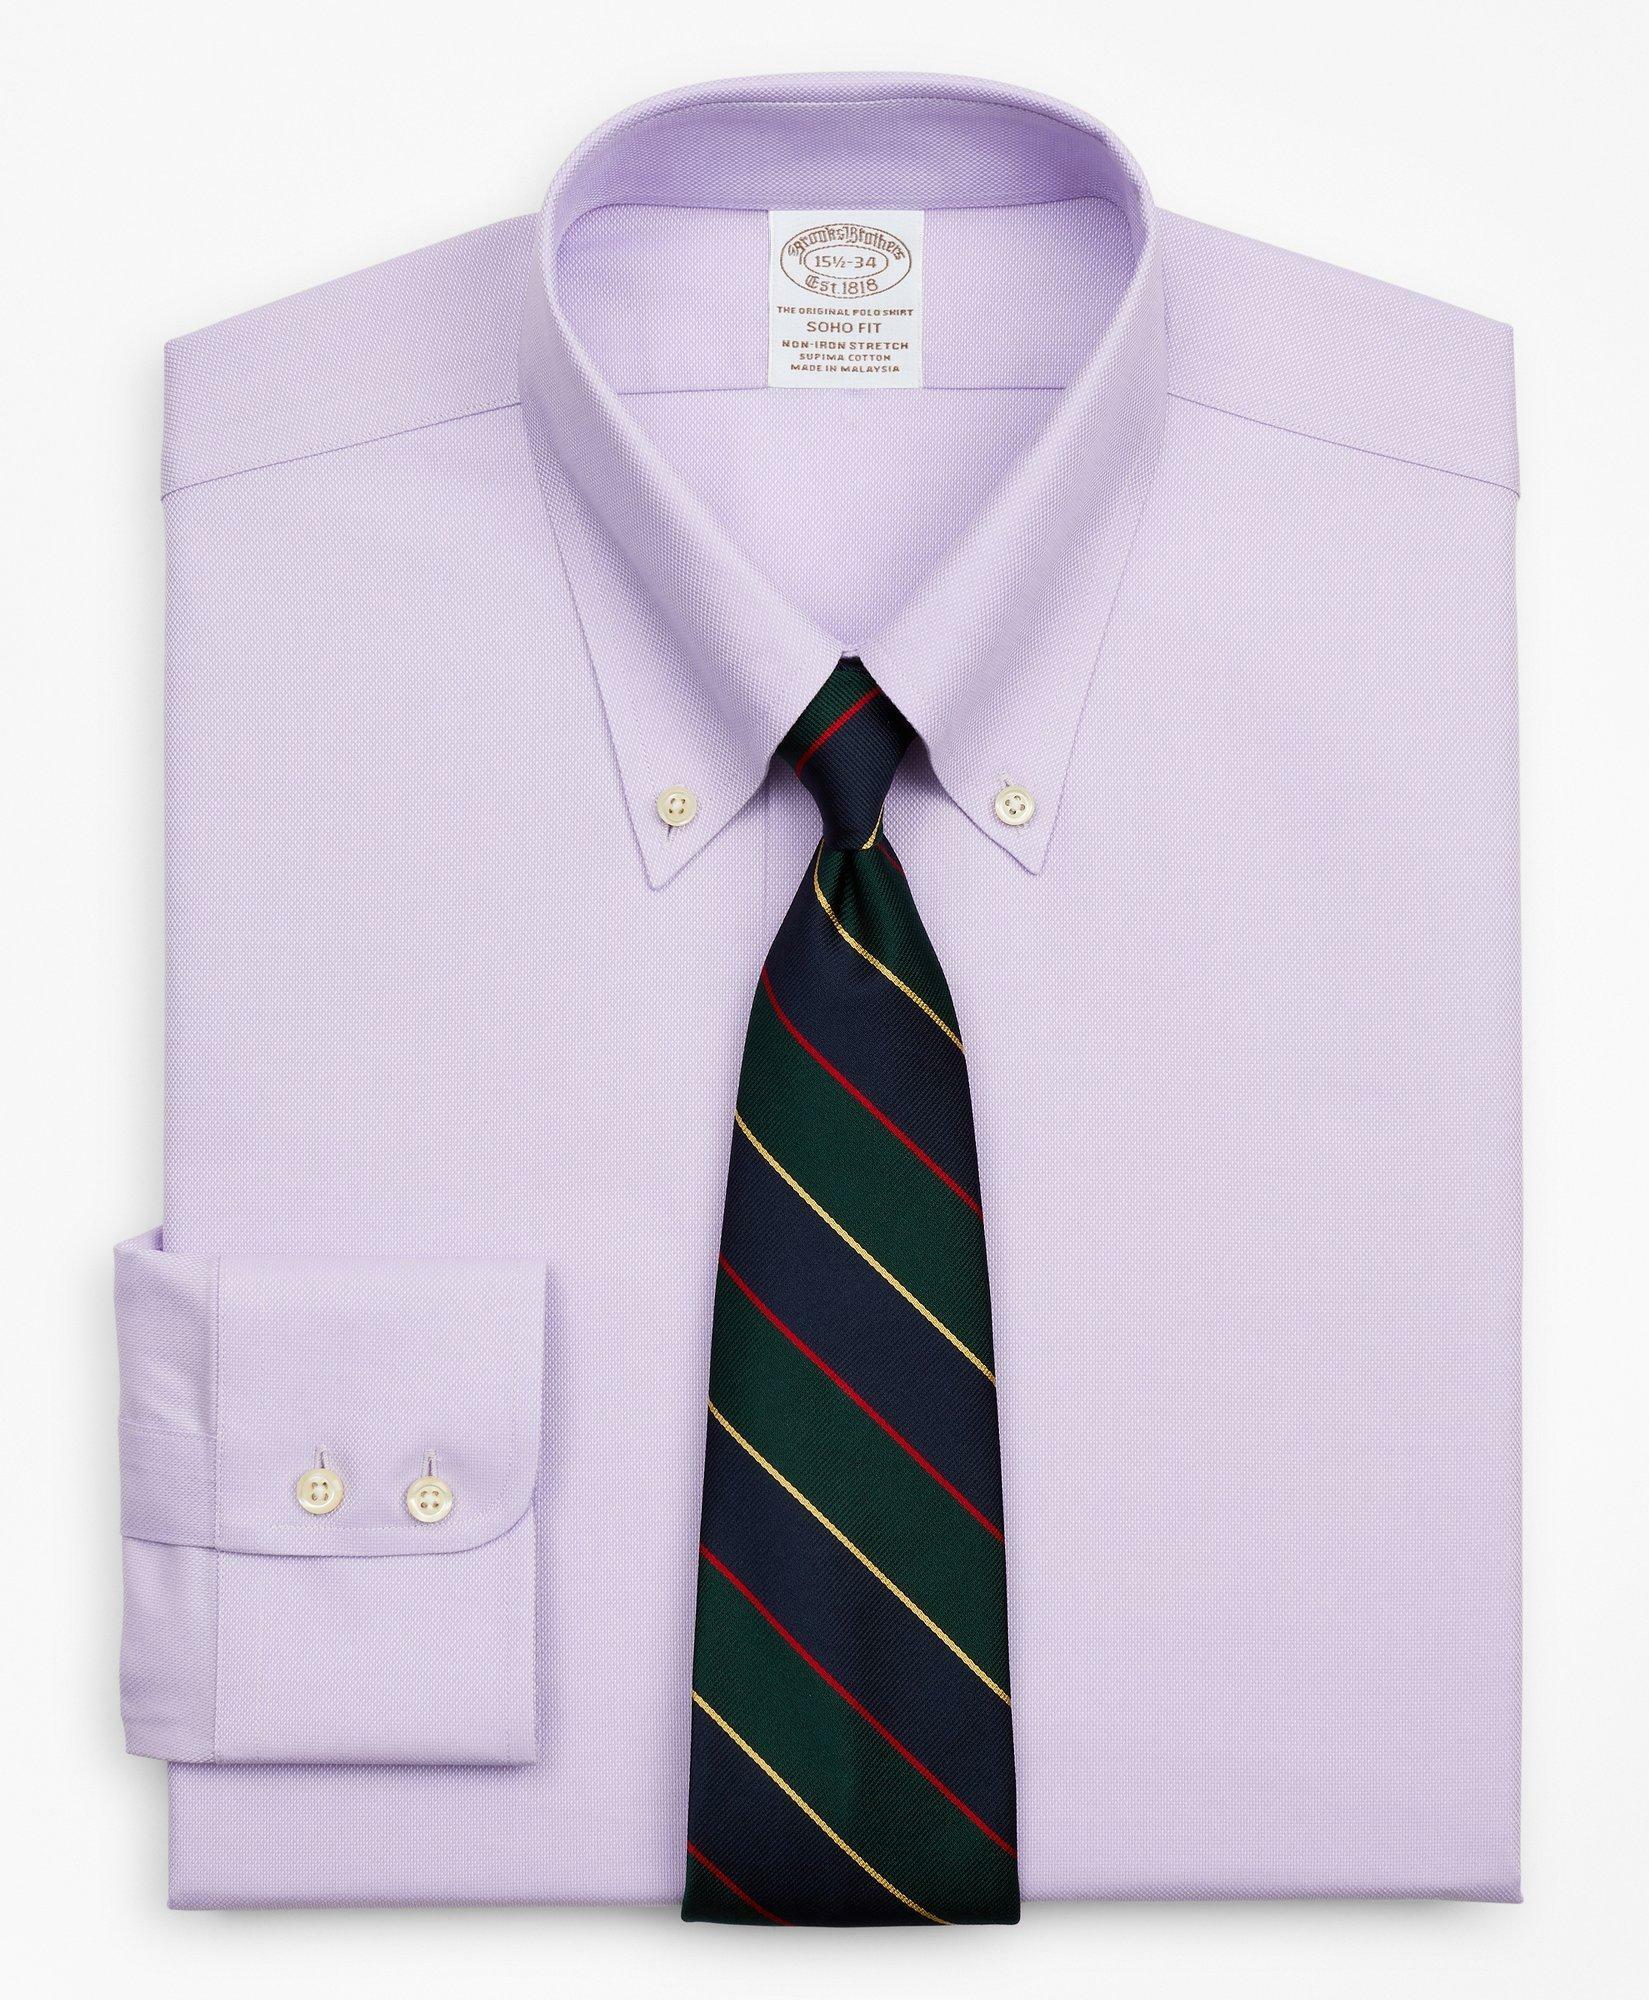 Brooks Brothers Men's Stretch Soho Extra-Slim-Fit Dress Shirt, Non-Iron Royal Oxford Button-Down Collar | Lavender